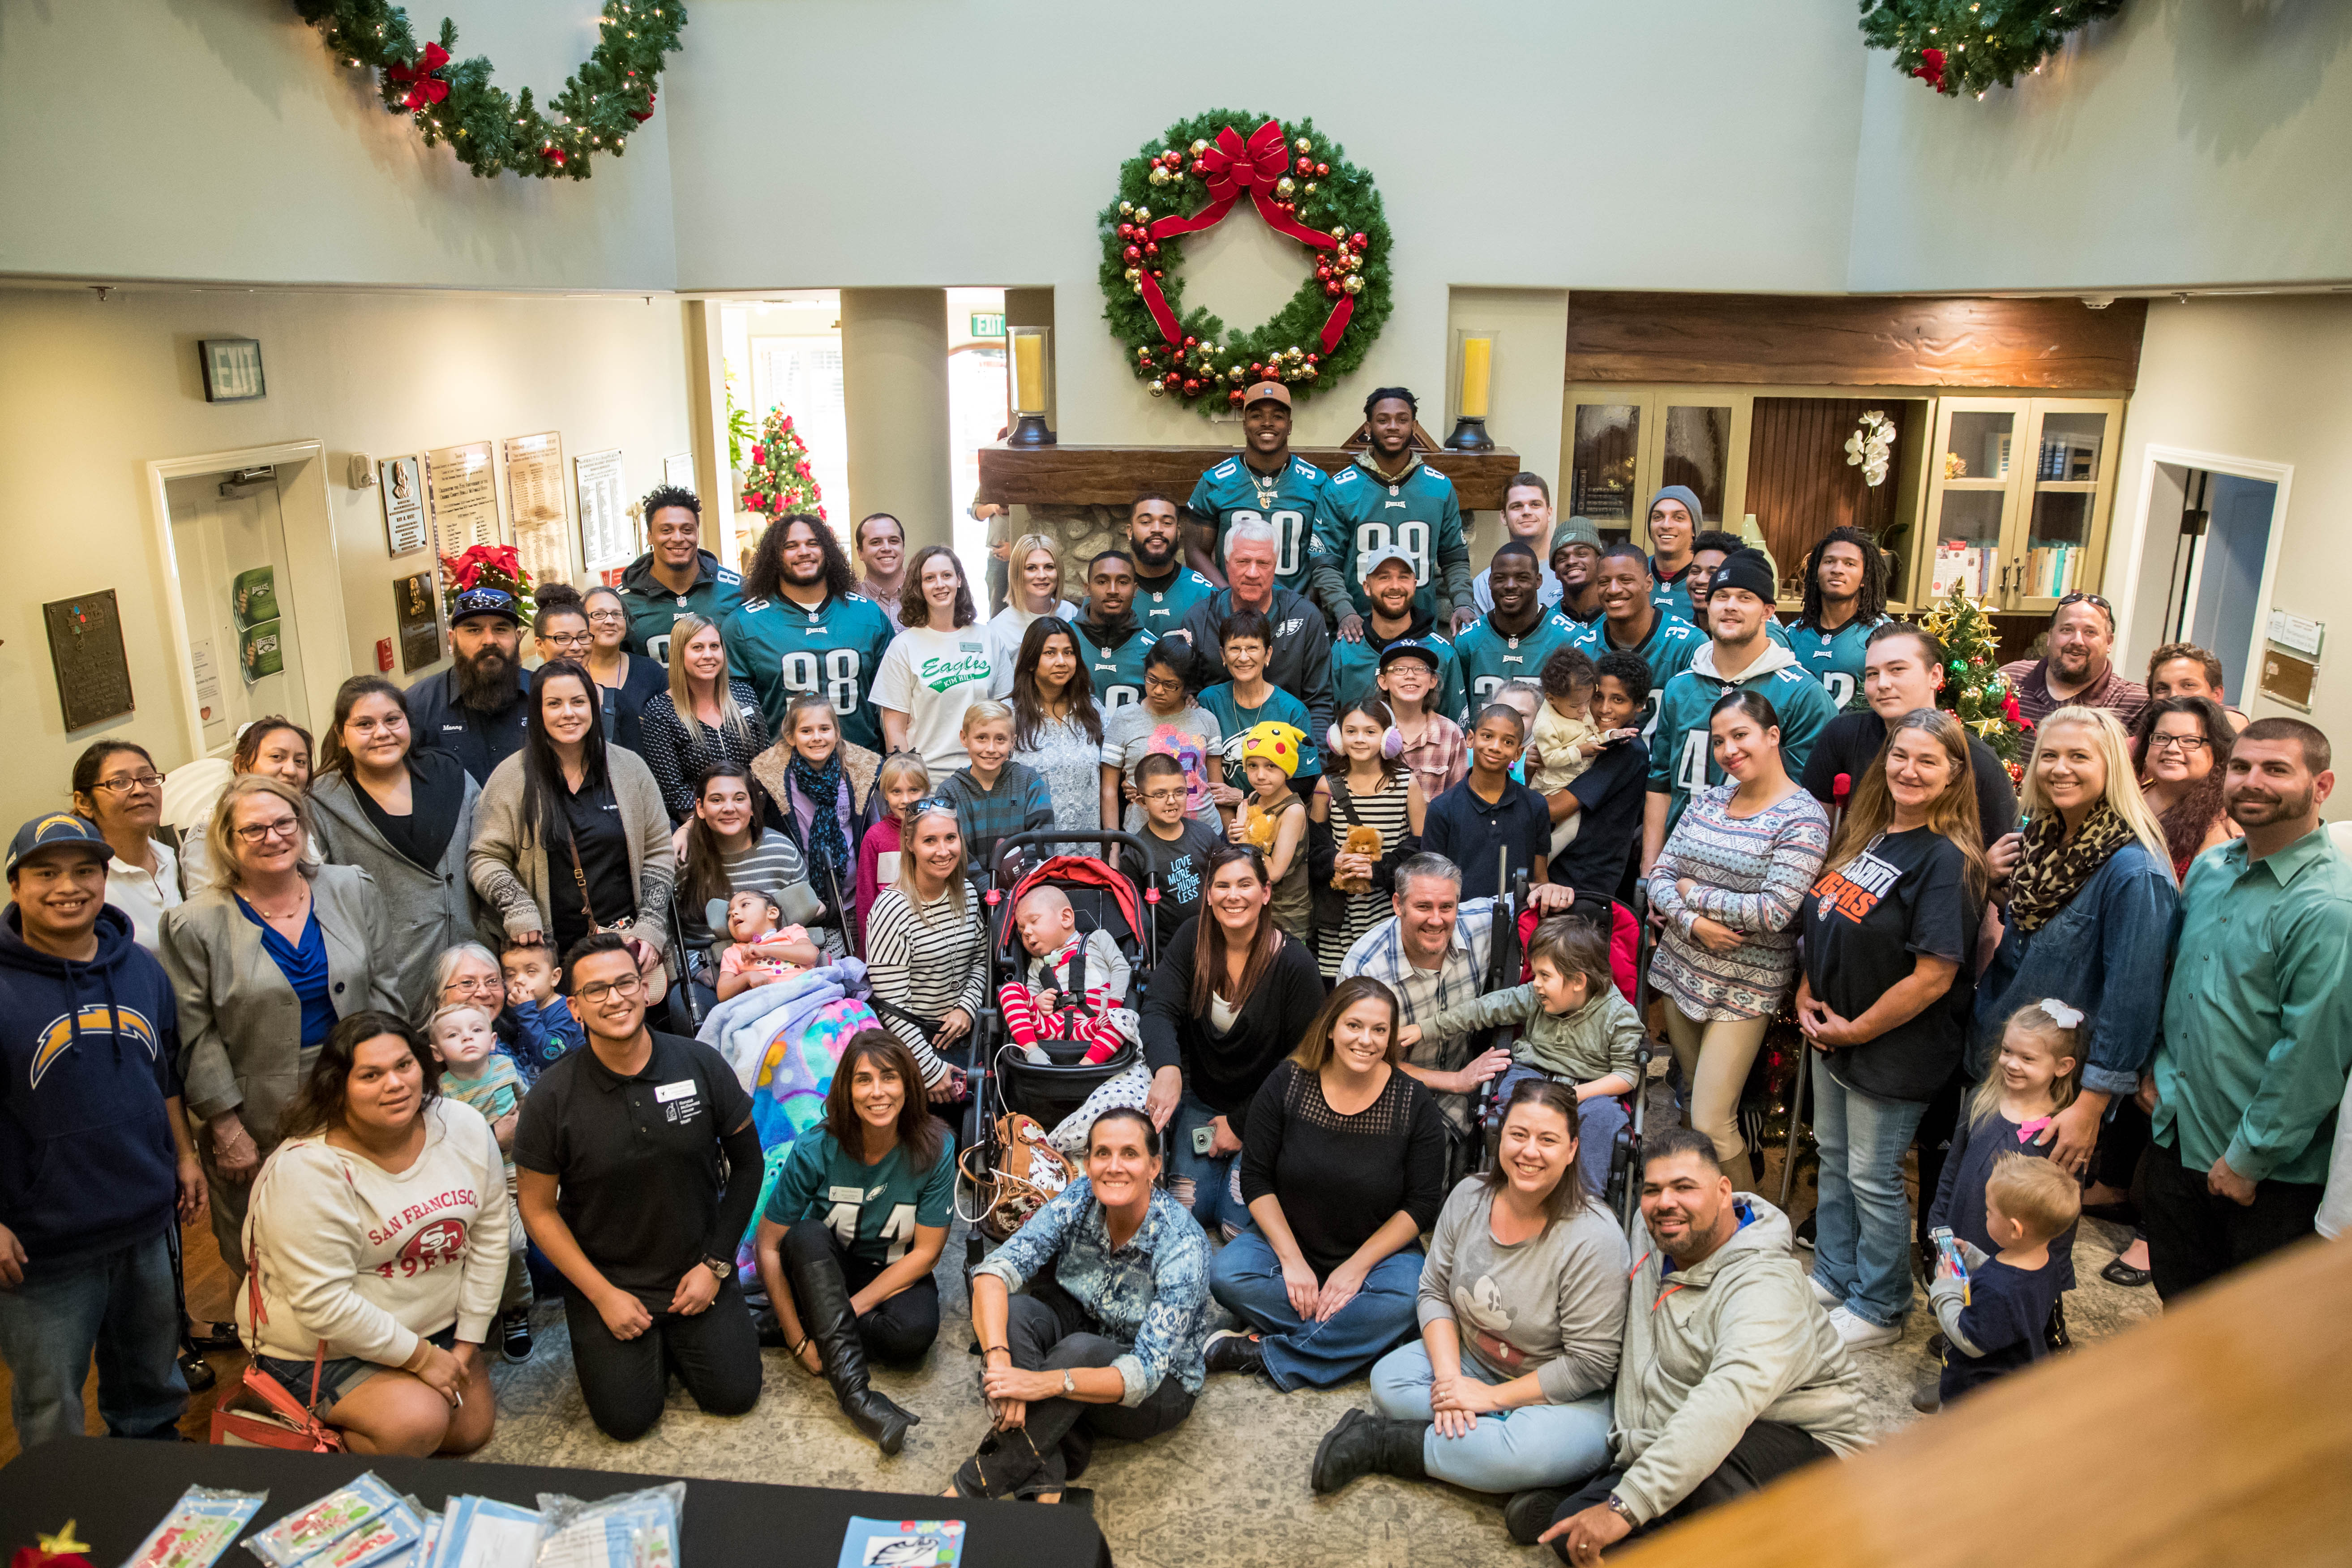 group photo from the Philadelphia Eagles visit of the Orange County Ronald McDonald House